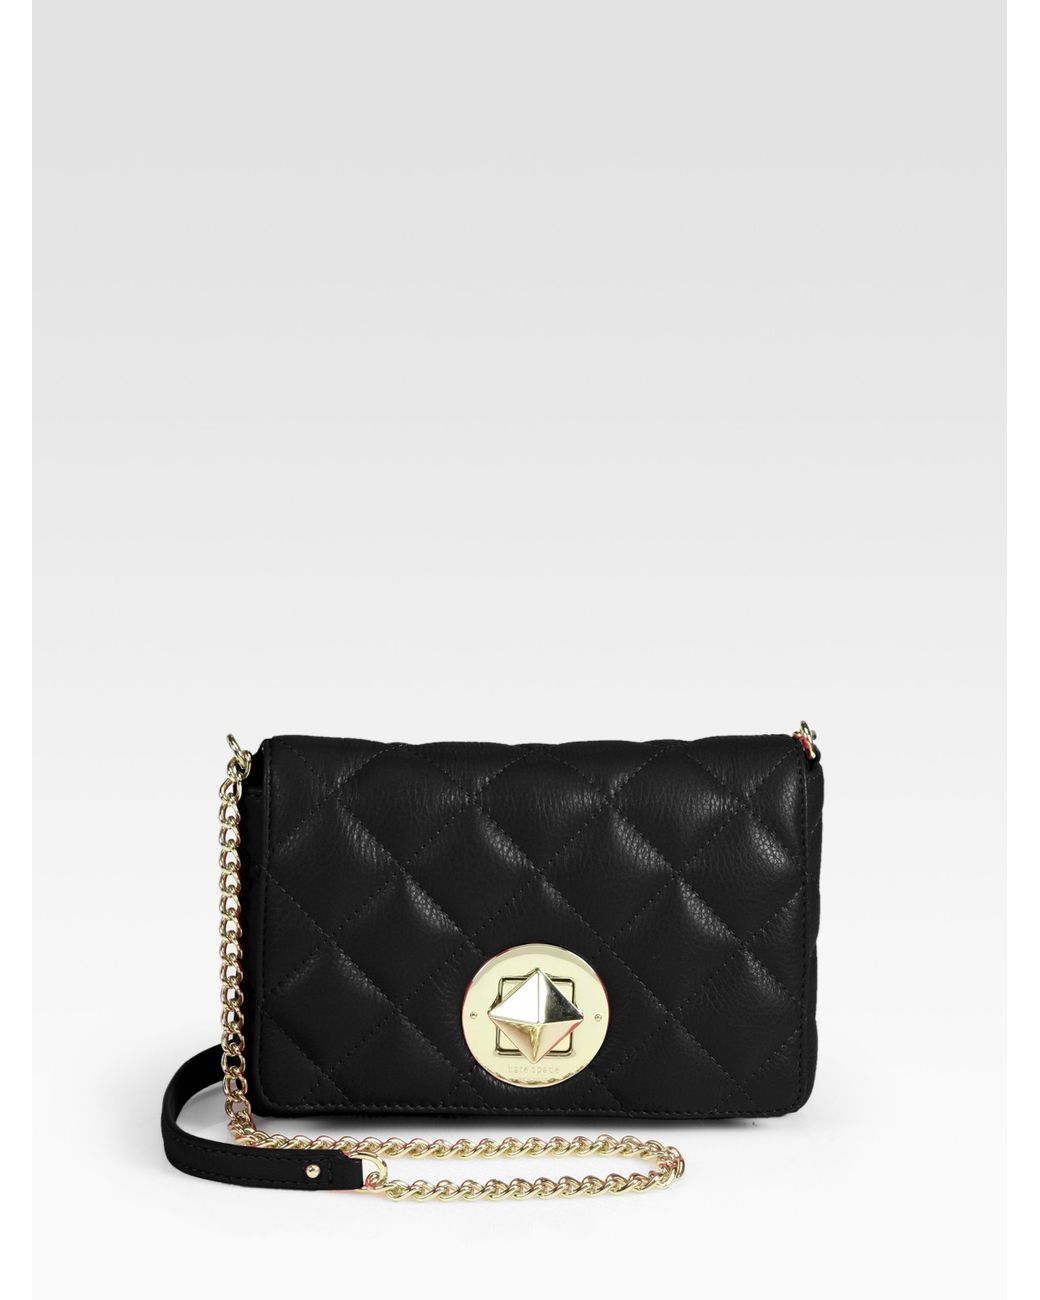 Kate Spade Dove Quilted Leather Chain Crossbody in Black